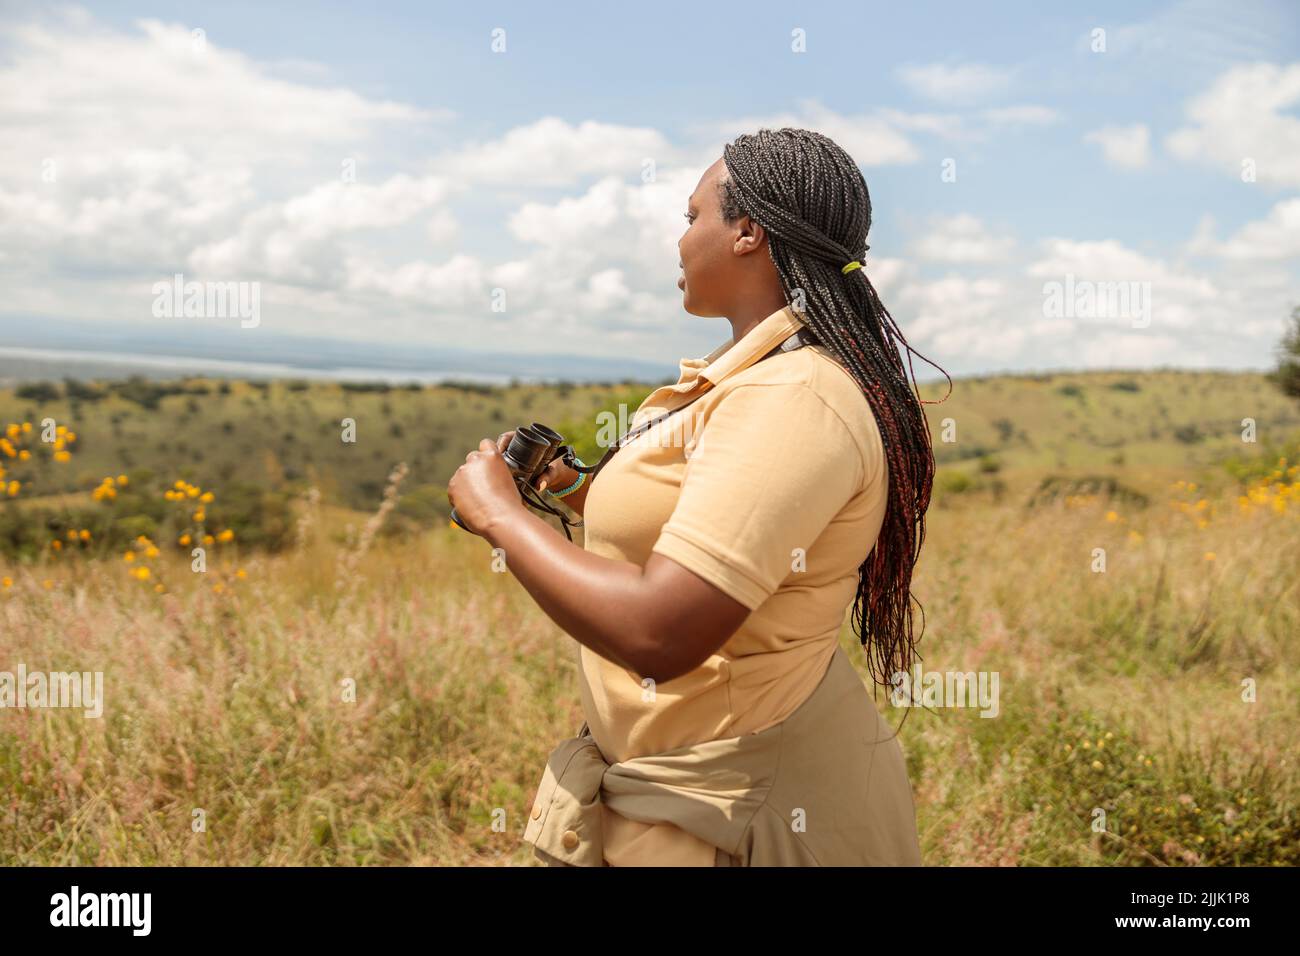 Professional female guide searching the landscape for wildlife in the savannah Stock Photo